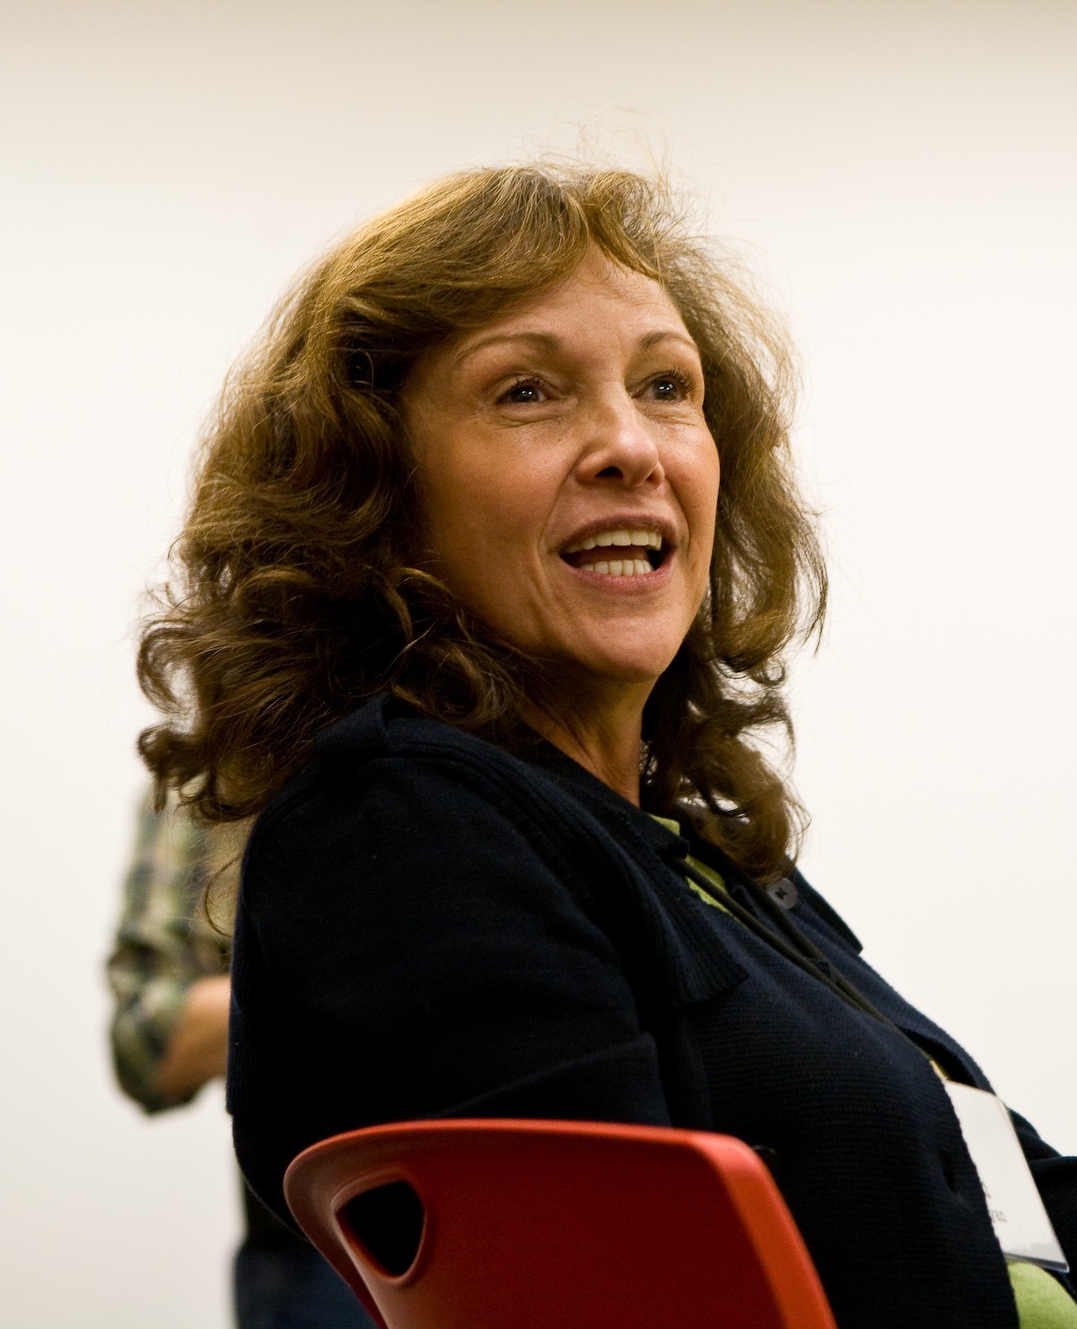 Ann Druyan (born June 13, 1949) is an American author and media producer known for her involvement in many projects aiming to popularize and explain science. She is probably best-known as the last wife of Carl Sagan, and co-author of the Cosmos series and book, along with Sagan and Steven Soter